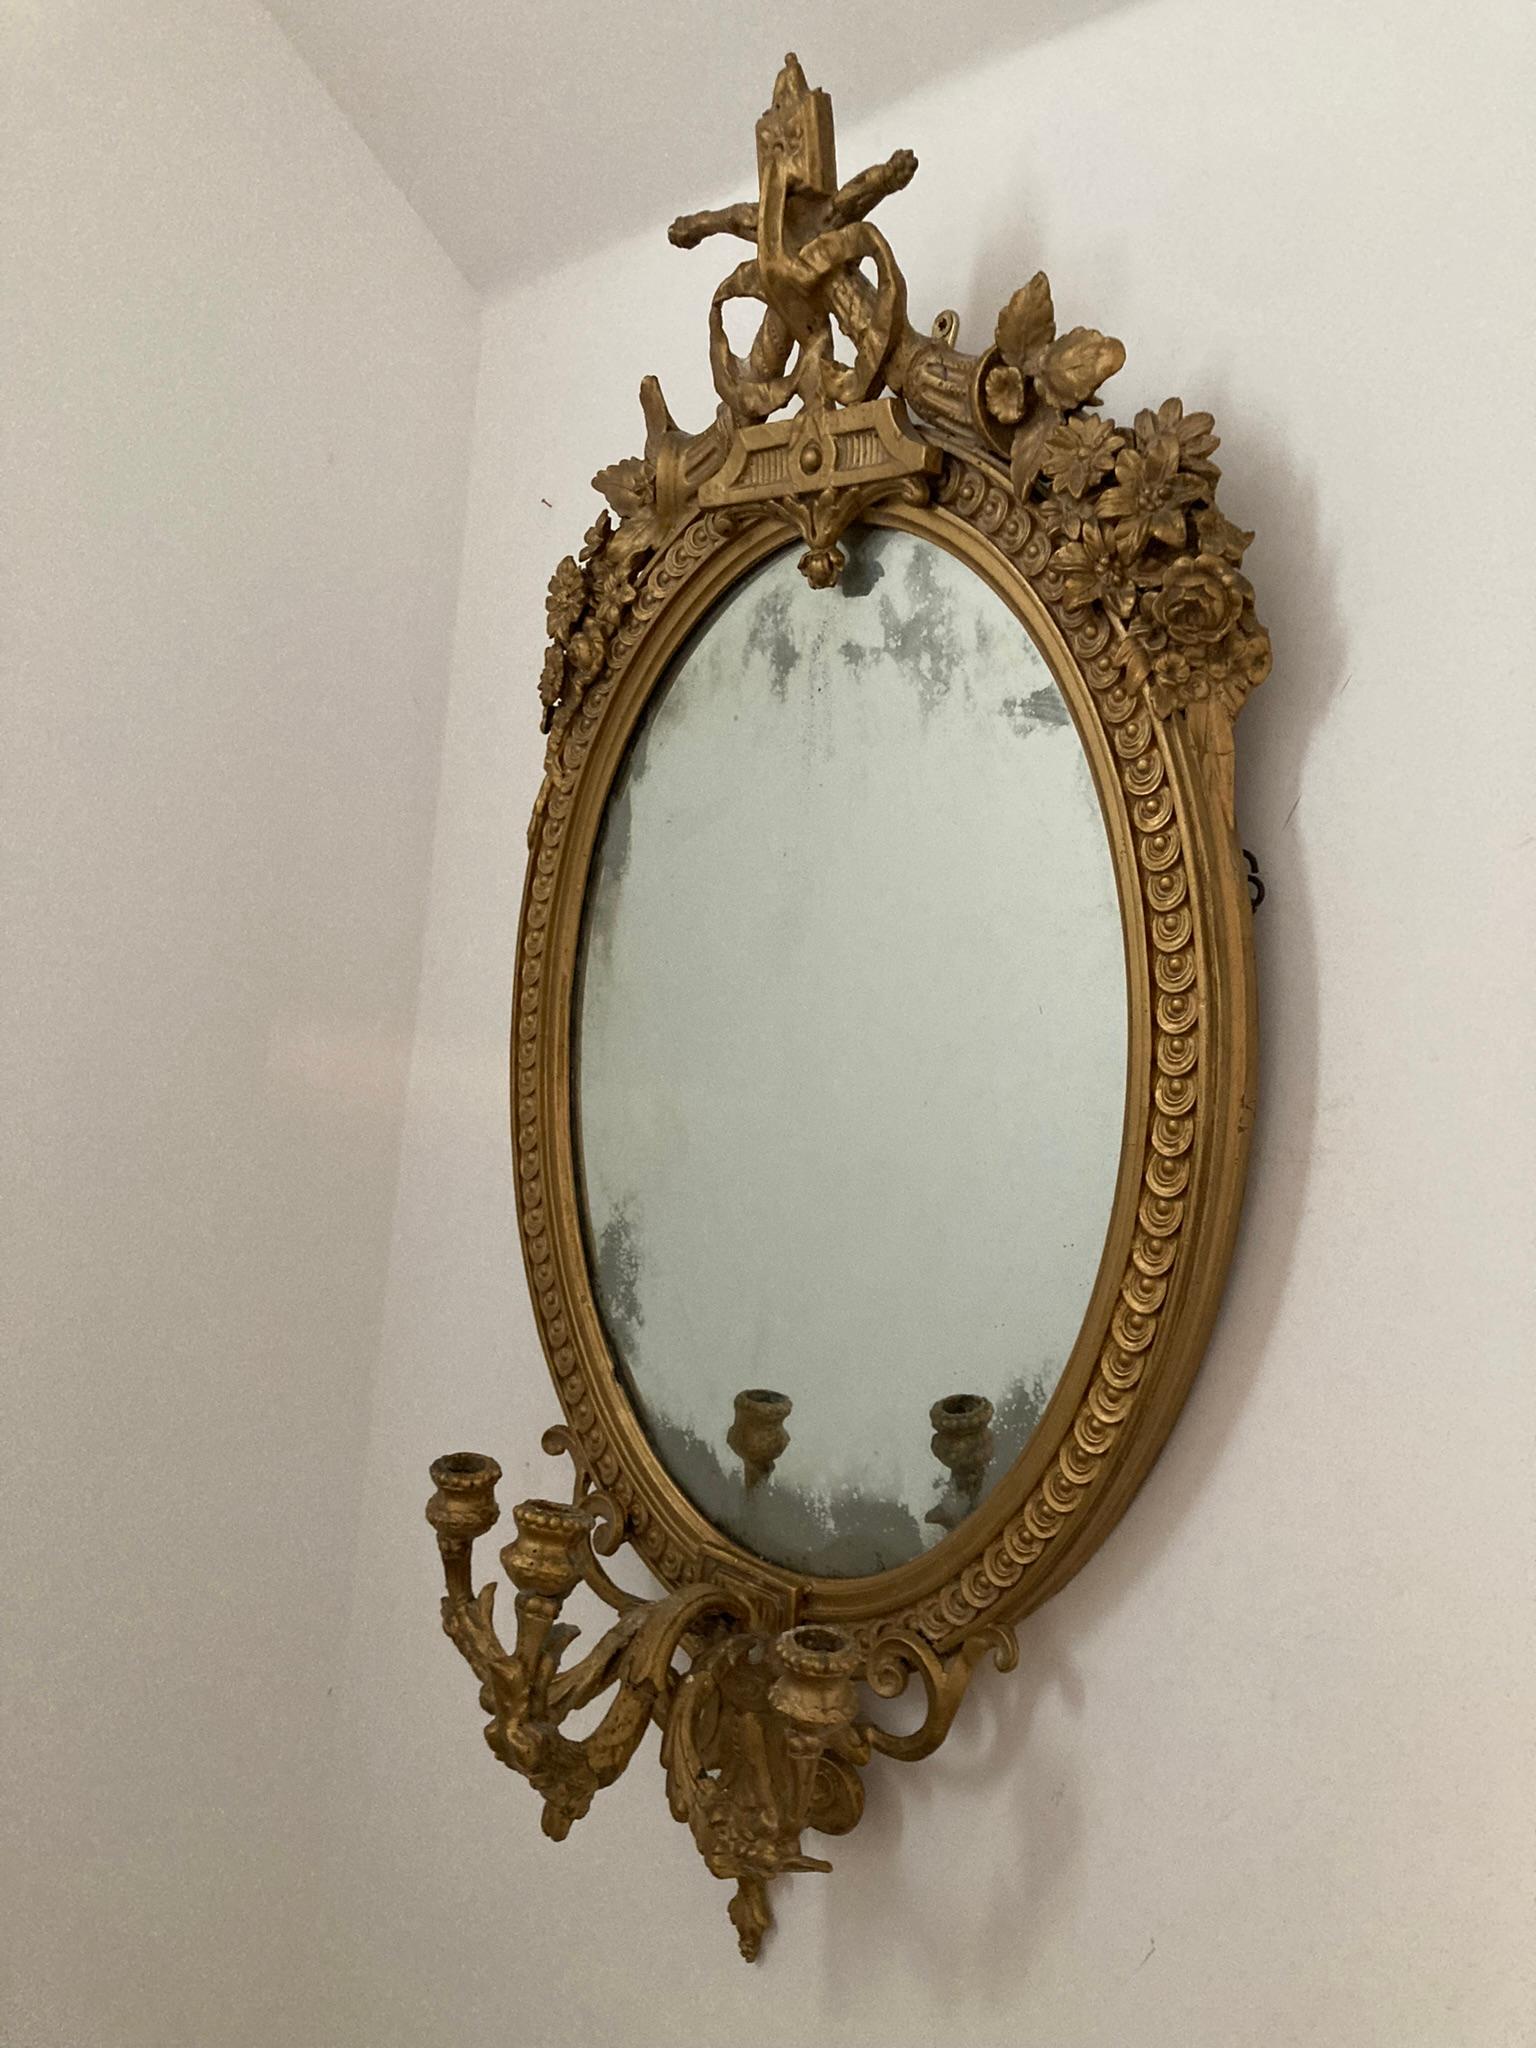 A beautiful Antique Gilt Gesso Girandole Mirror in its original condition. Dating back to mid 19th Century. Foliate display around the frame and beaded edging each side with triple stemmed griandole at the base of the mirror. Original back with a